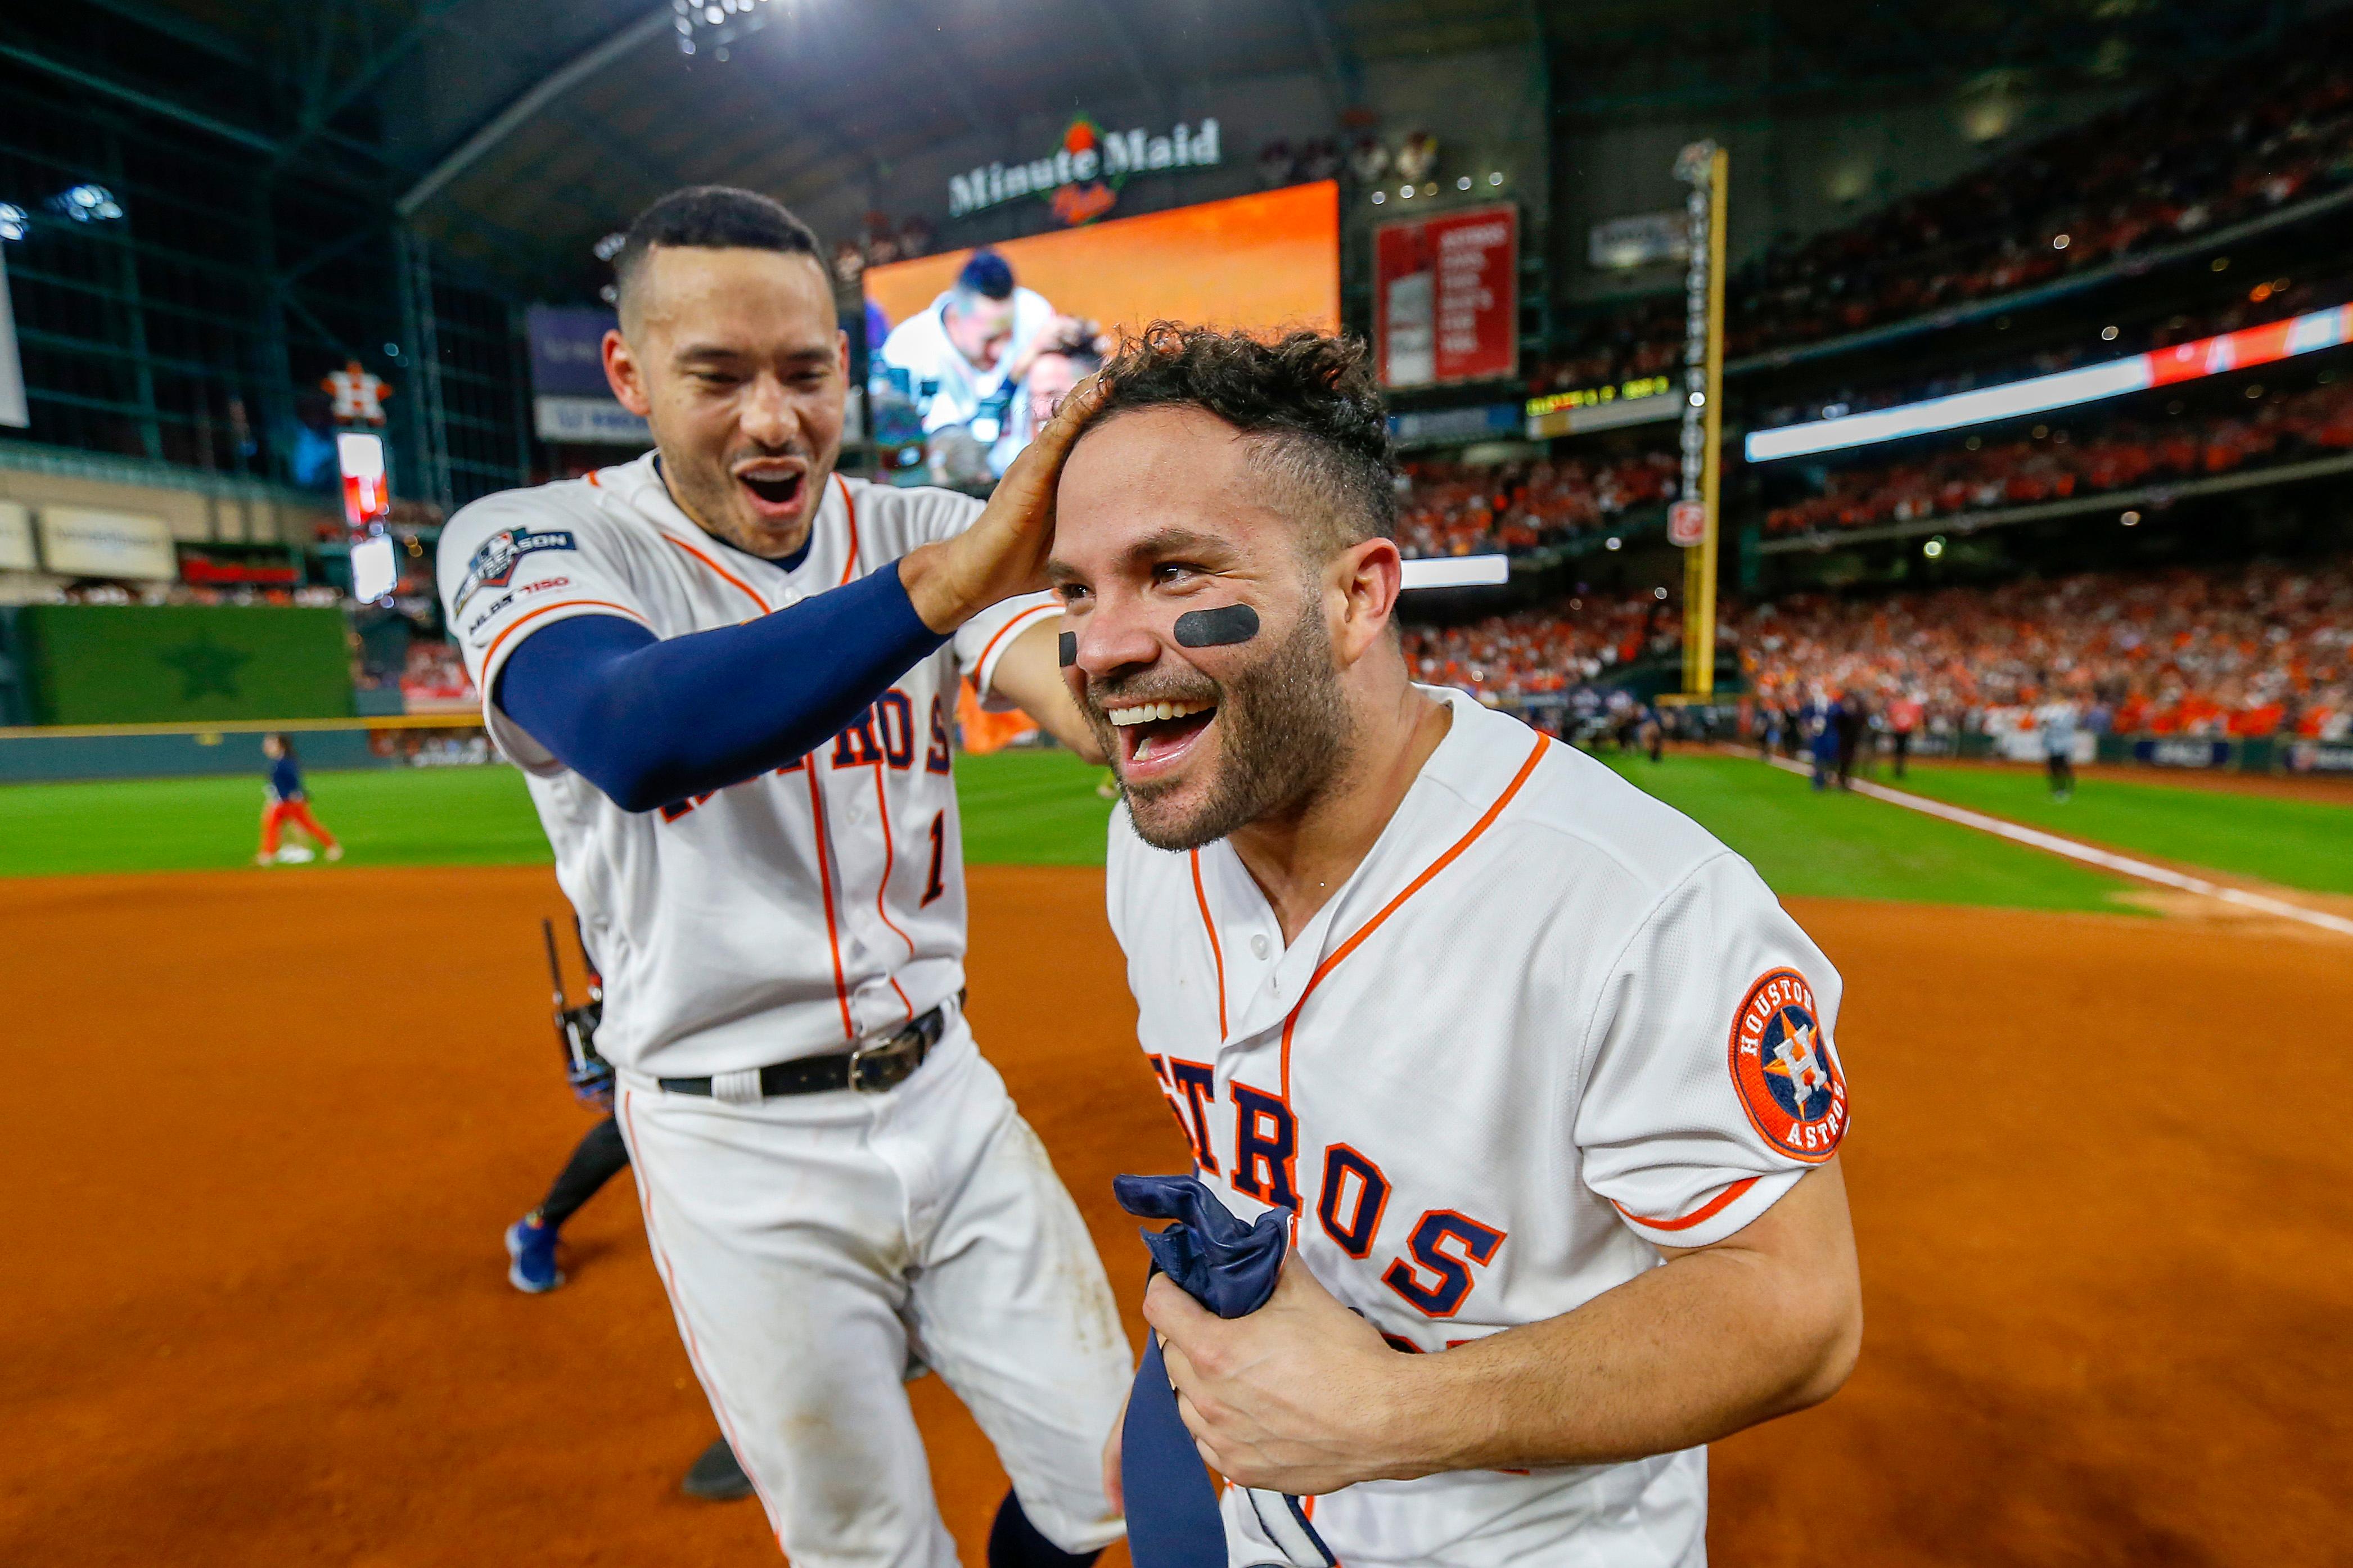 Astros MVP Jose Altuve Shirt Removal Controversy Gets Deeper